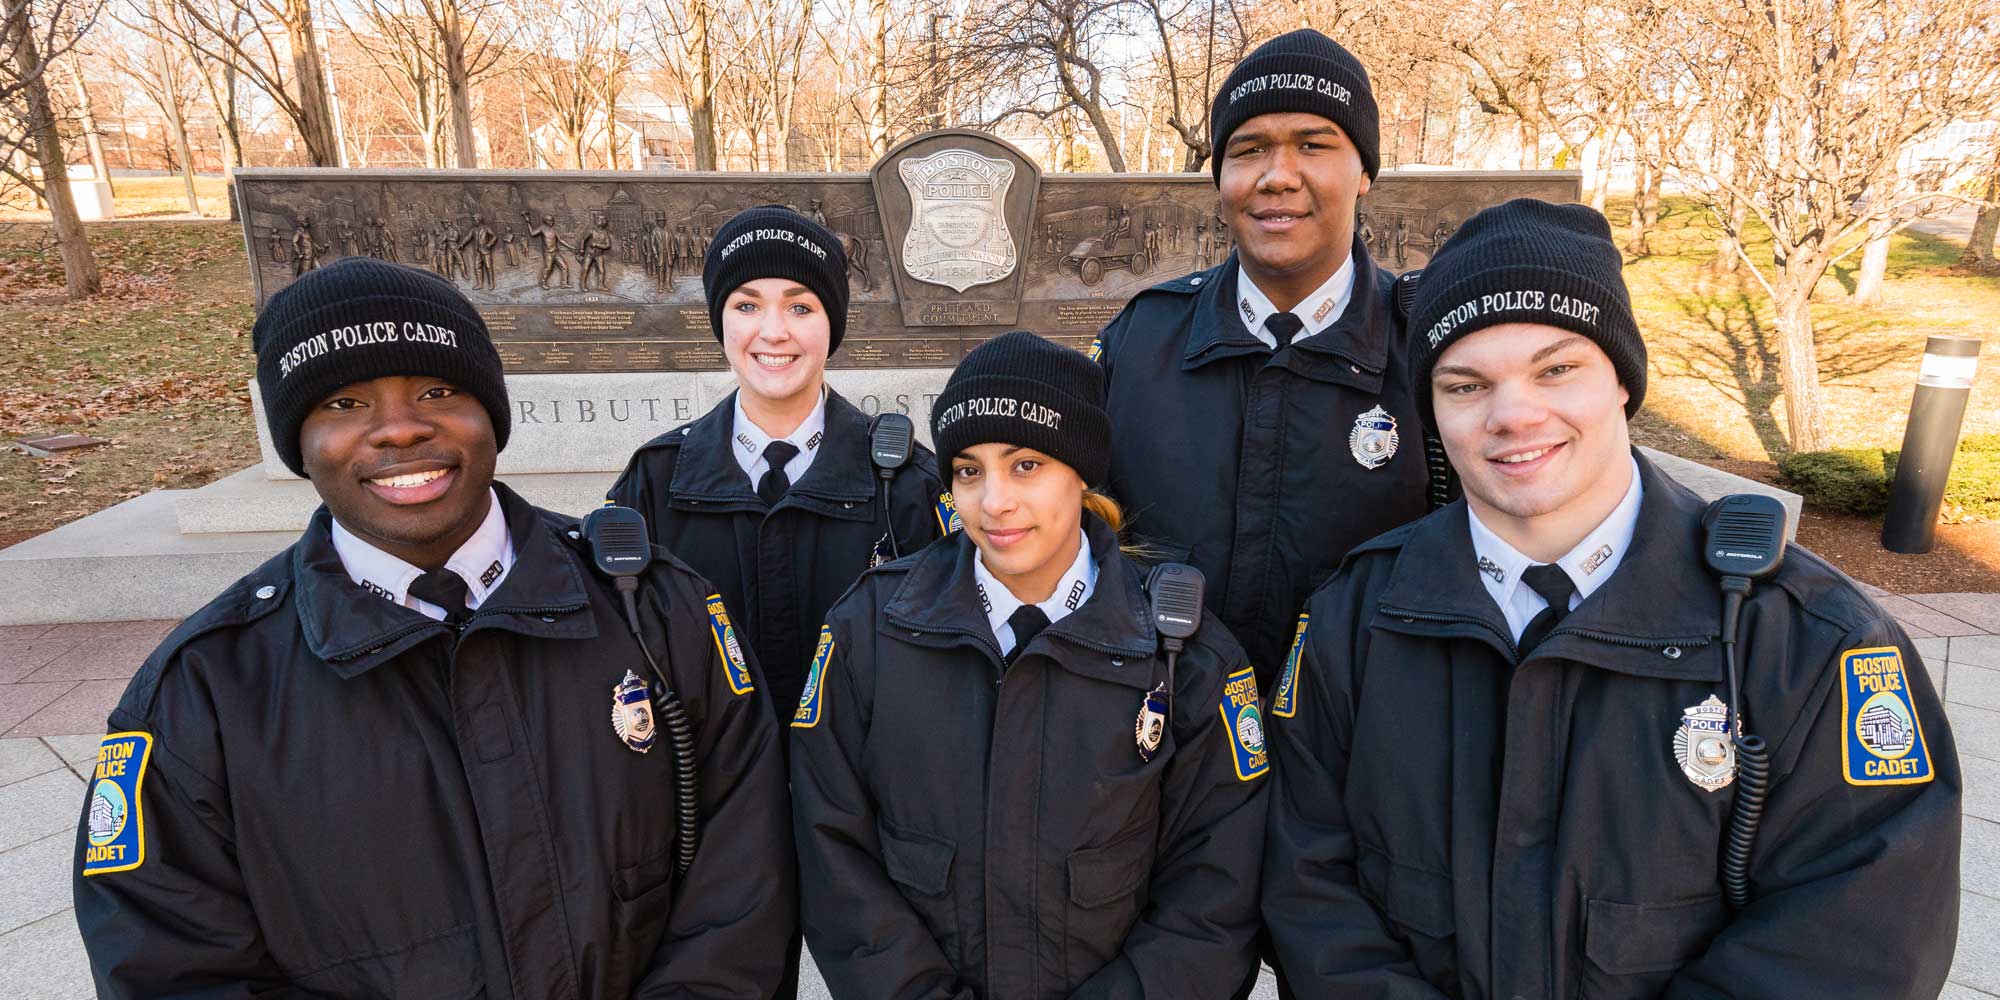 A group of smiling police cadets